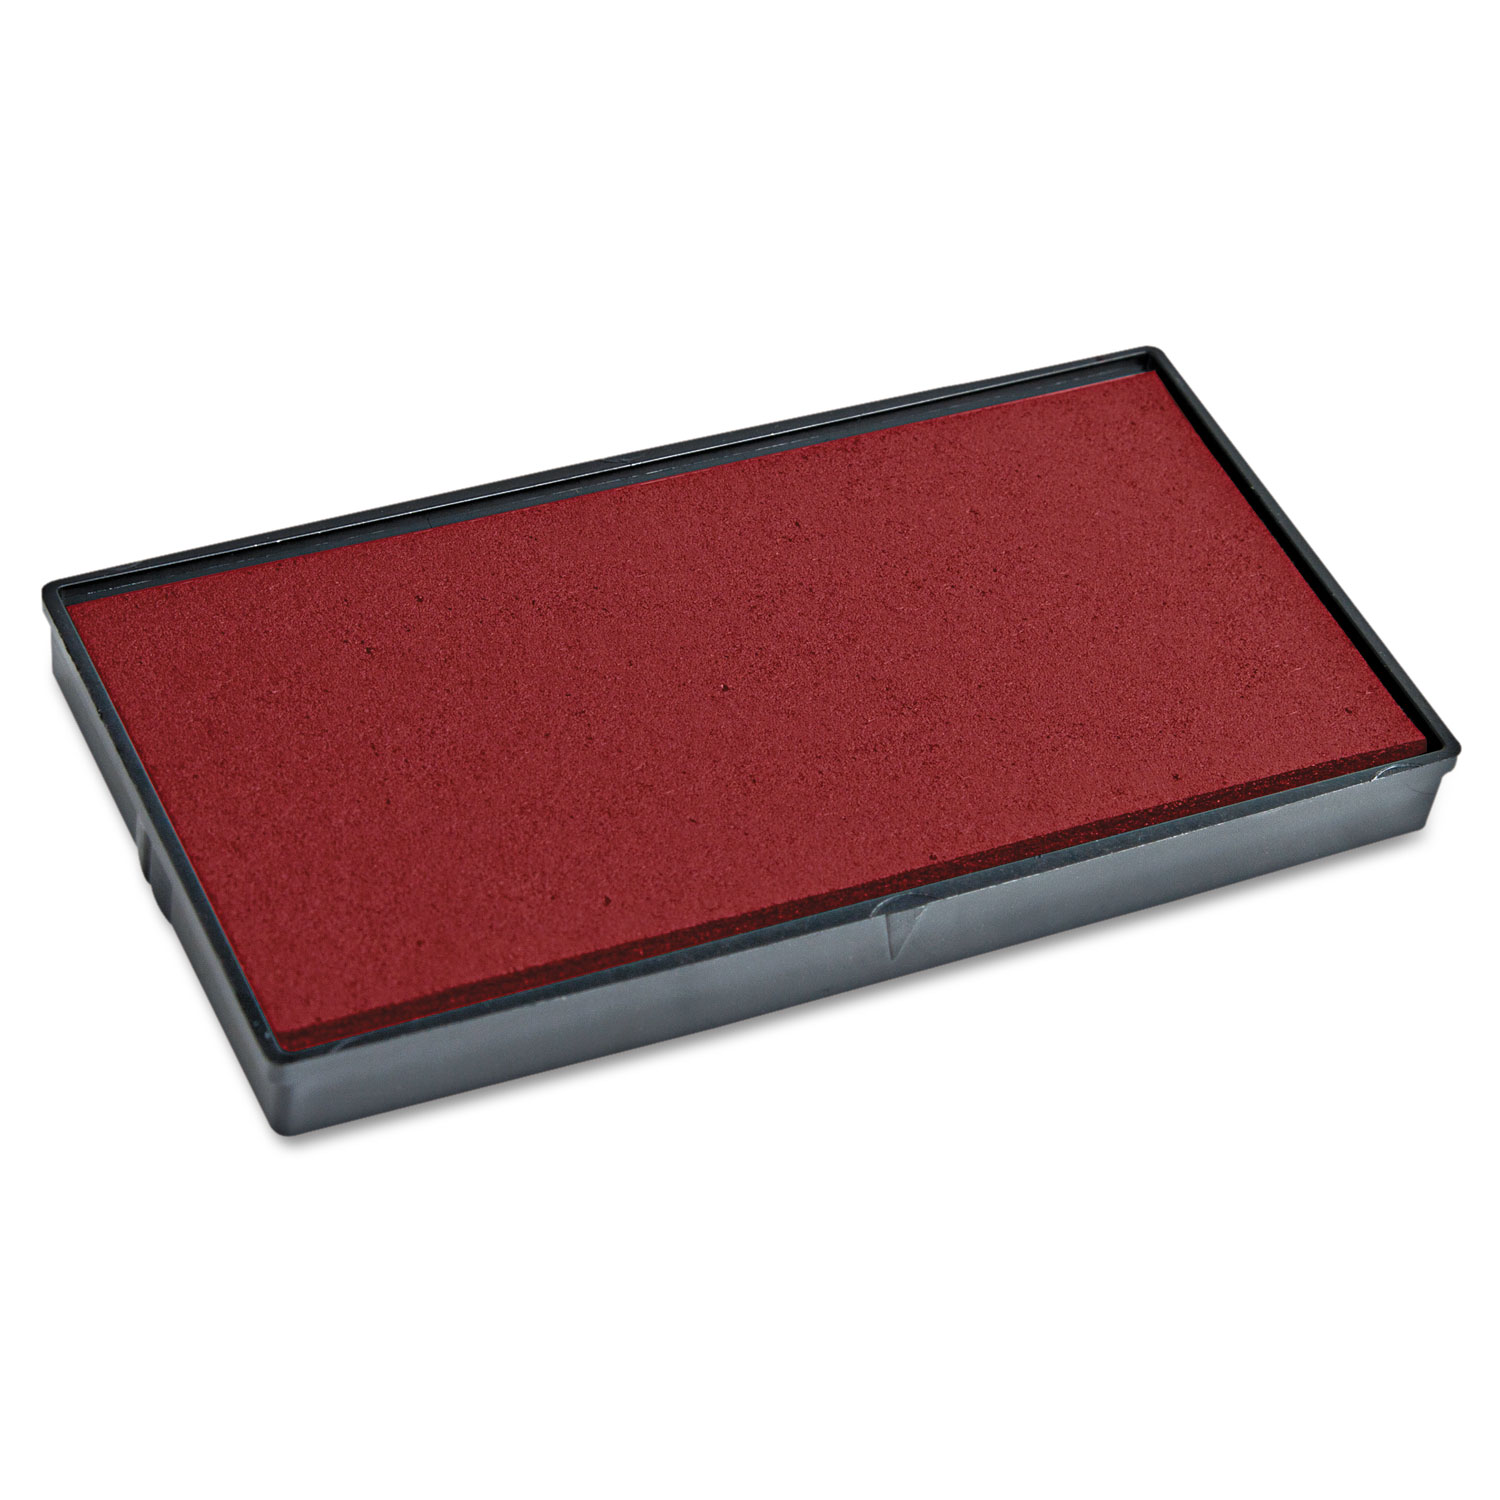  COSCO 2000PLUS 065473 Replacement Ink Pad for 2000PLUS 1SI40PGL & 1SI40P, Red (COS065473) 